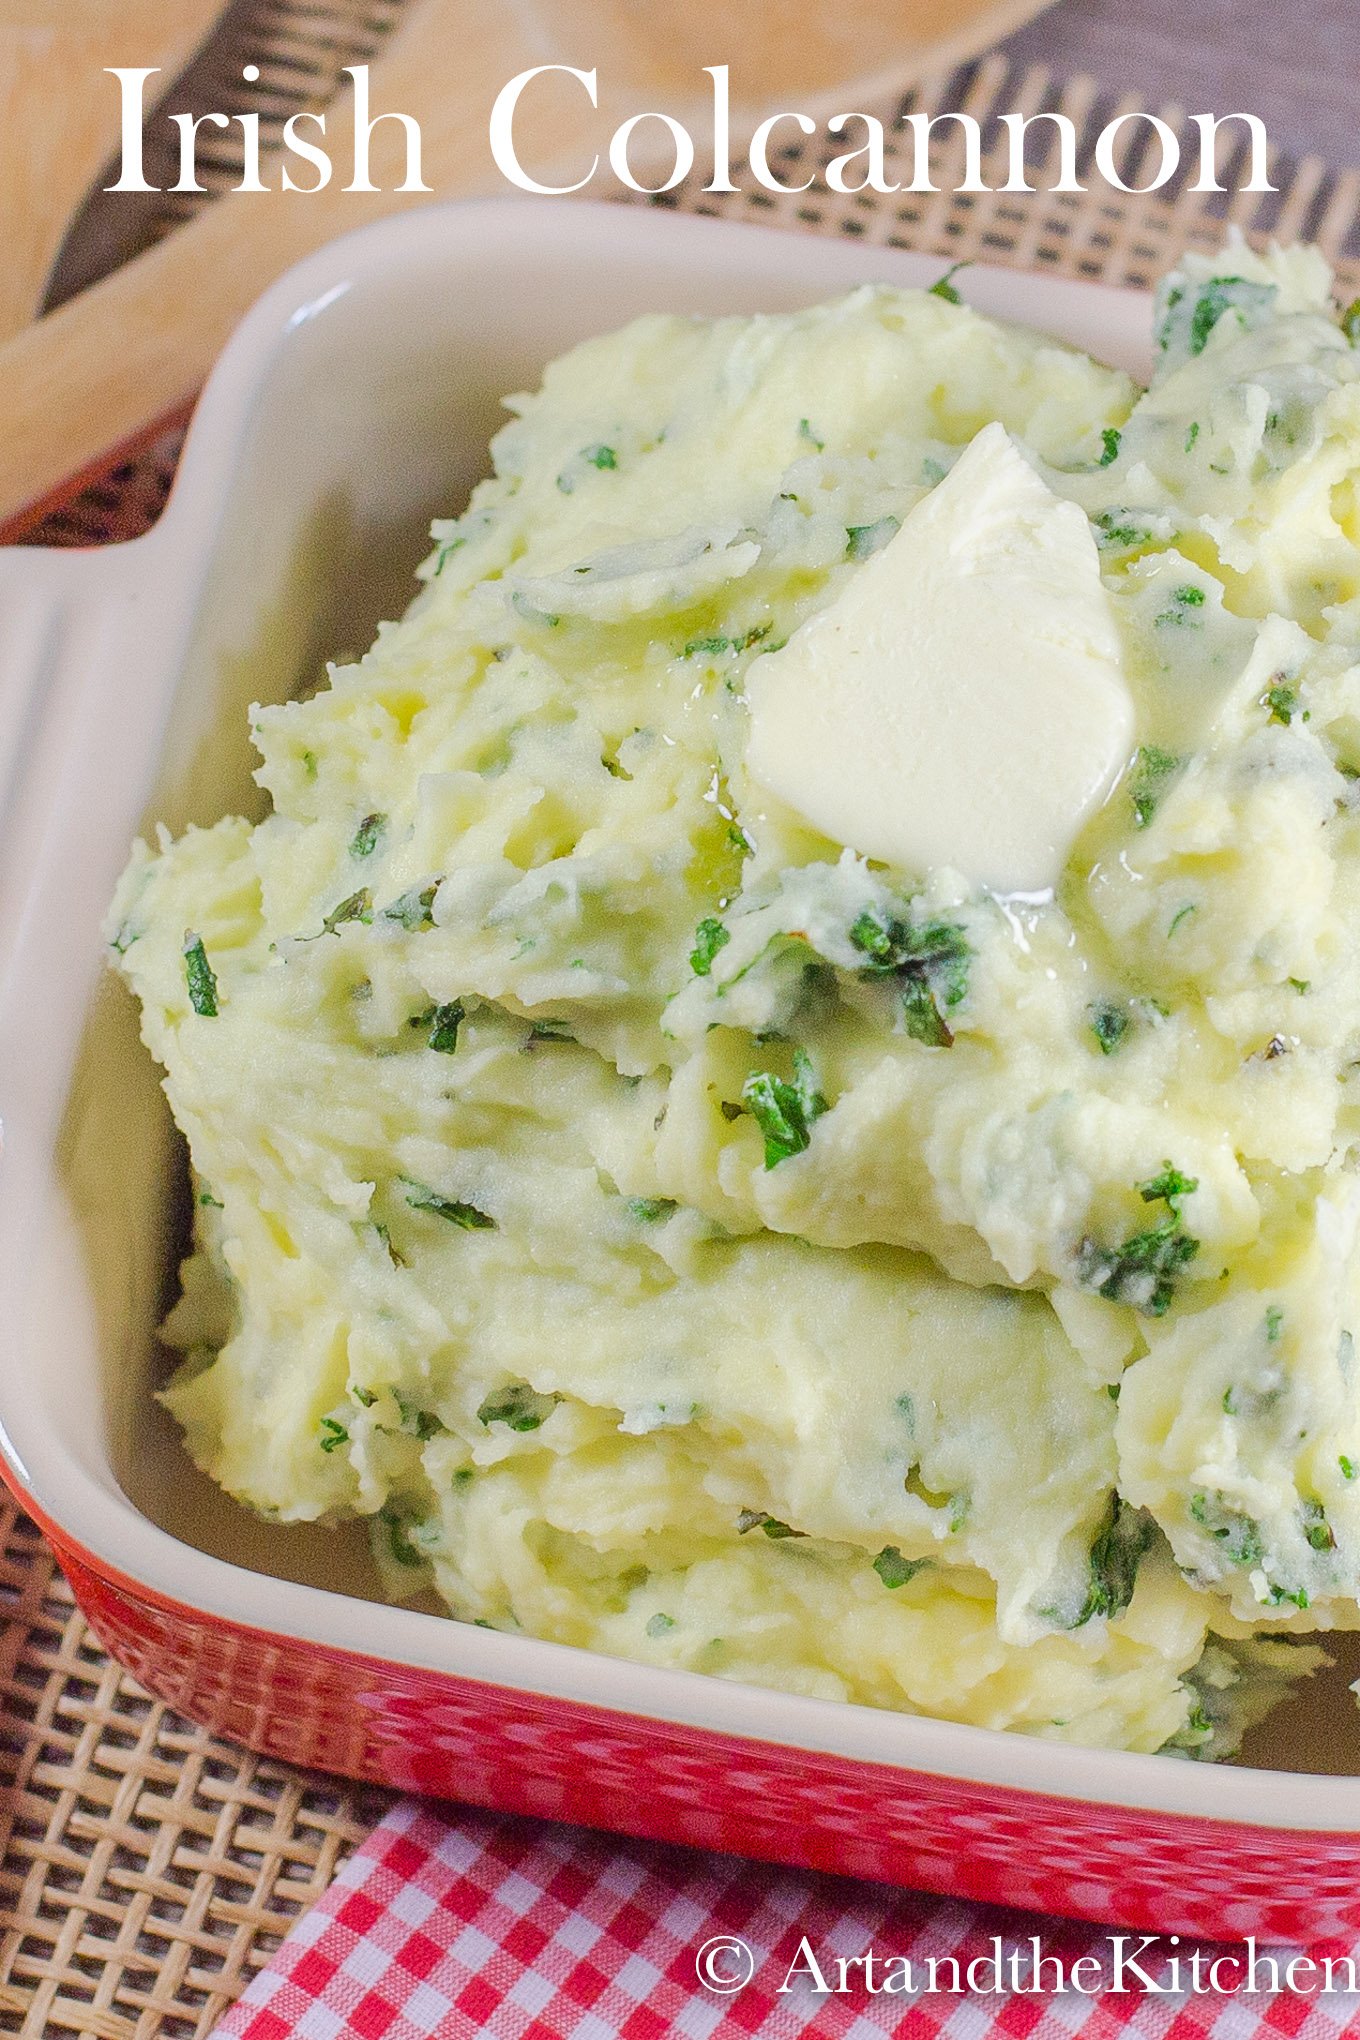 Traditional Irish recipe, colcannon is made with kale, butter and milk. Great dish for St. Patrick's Day! via @artandthekitch